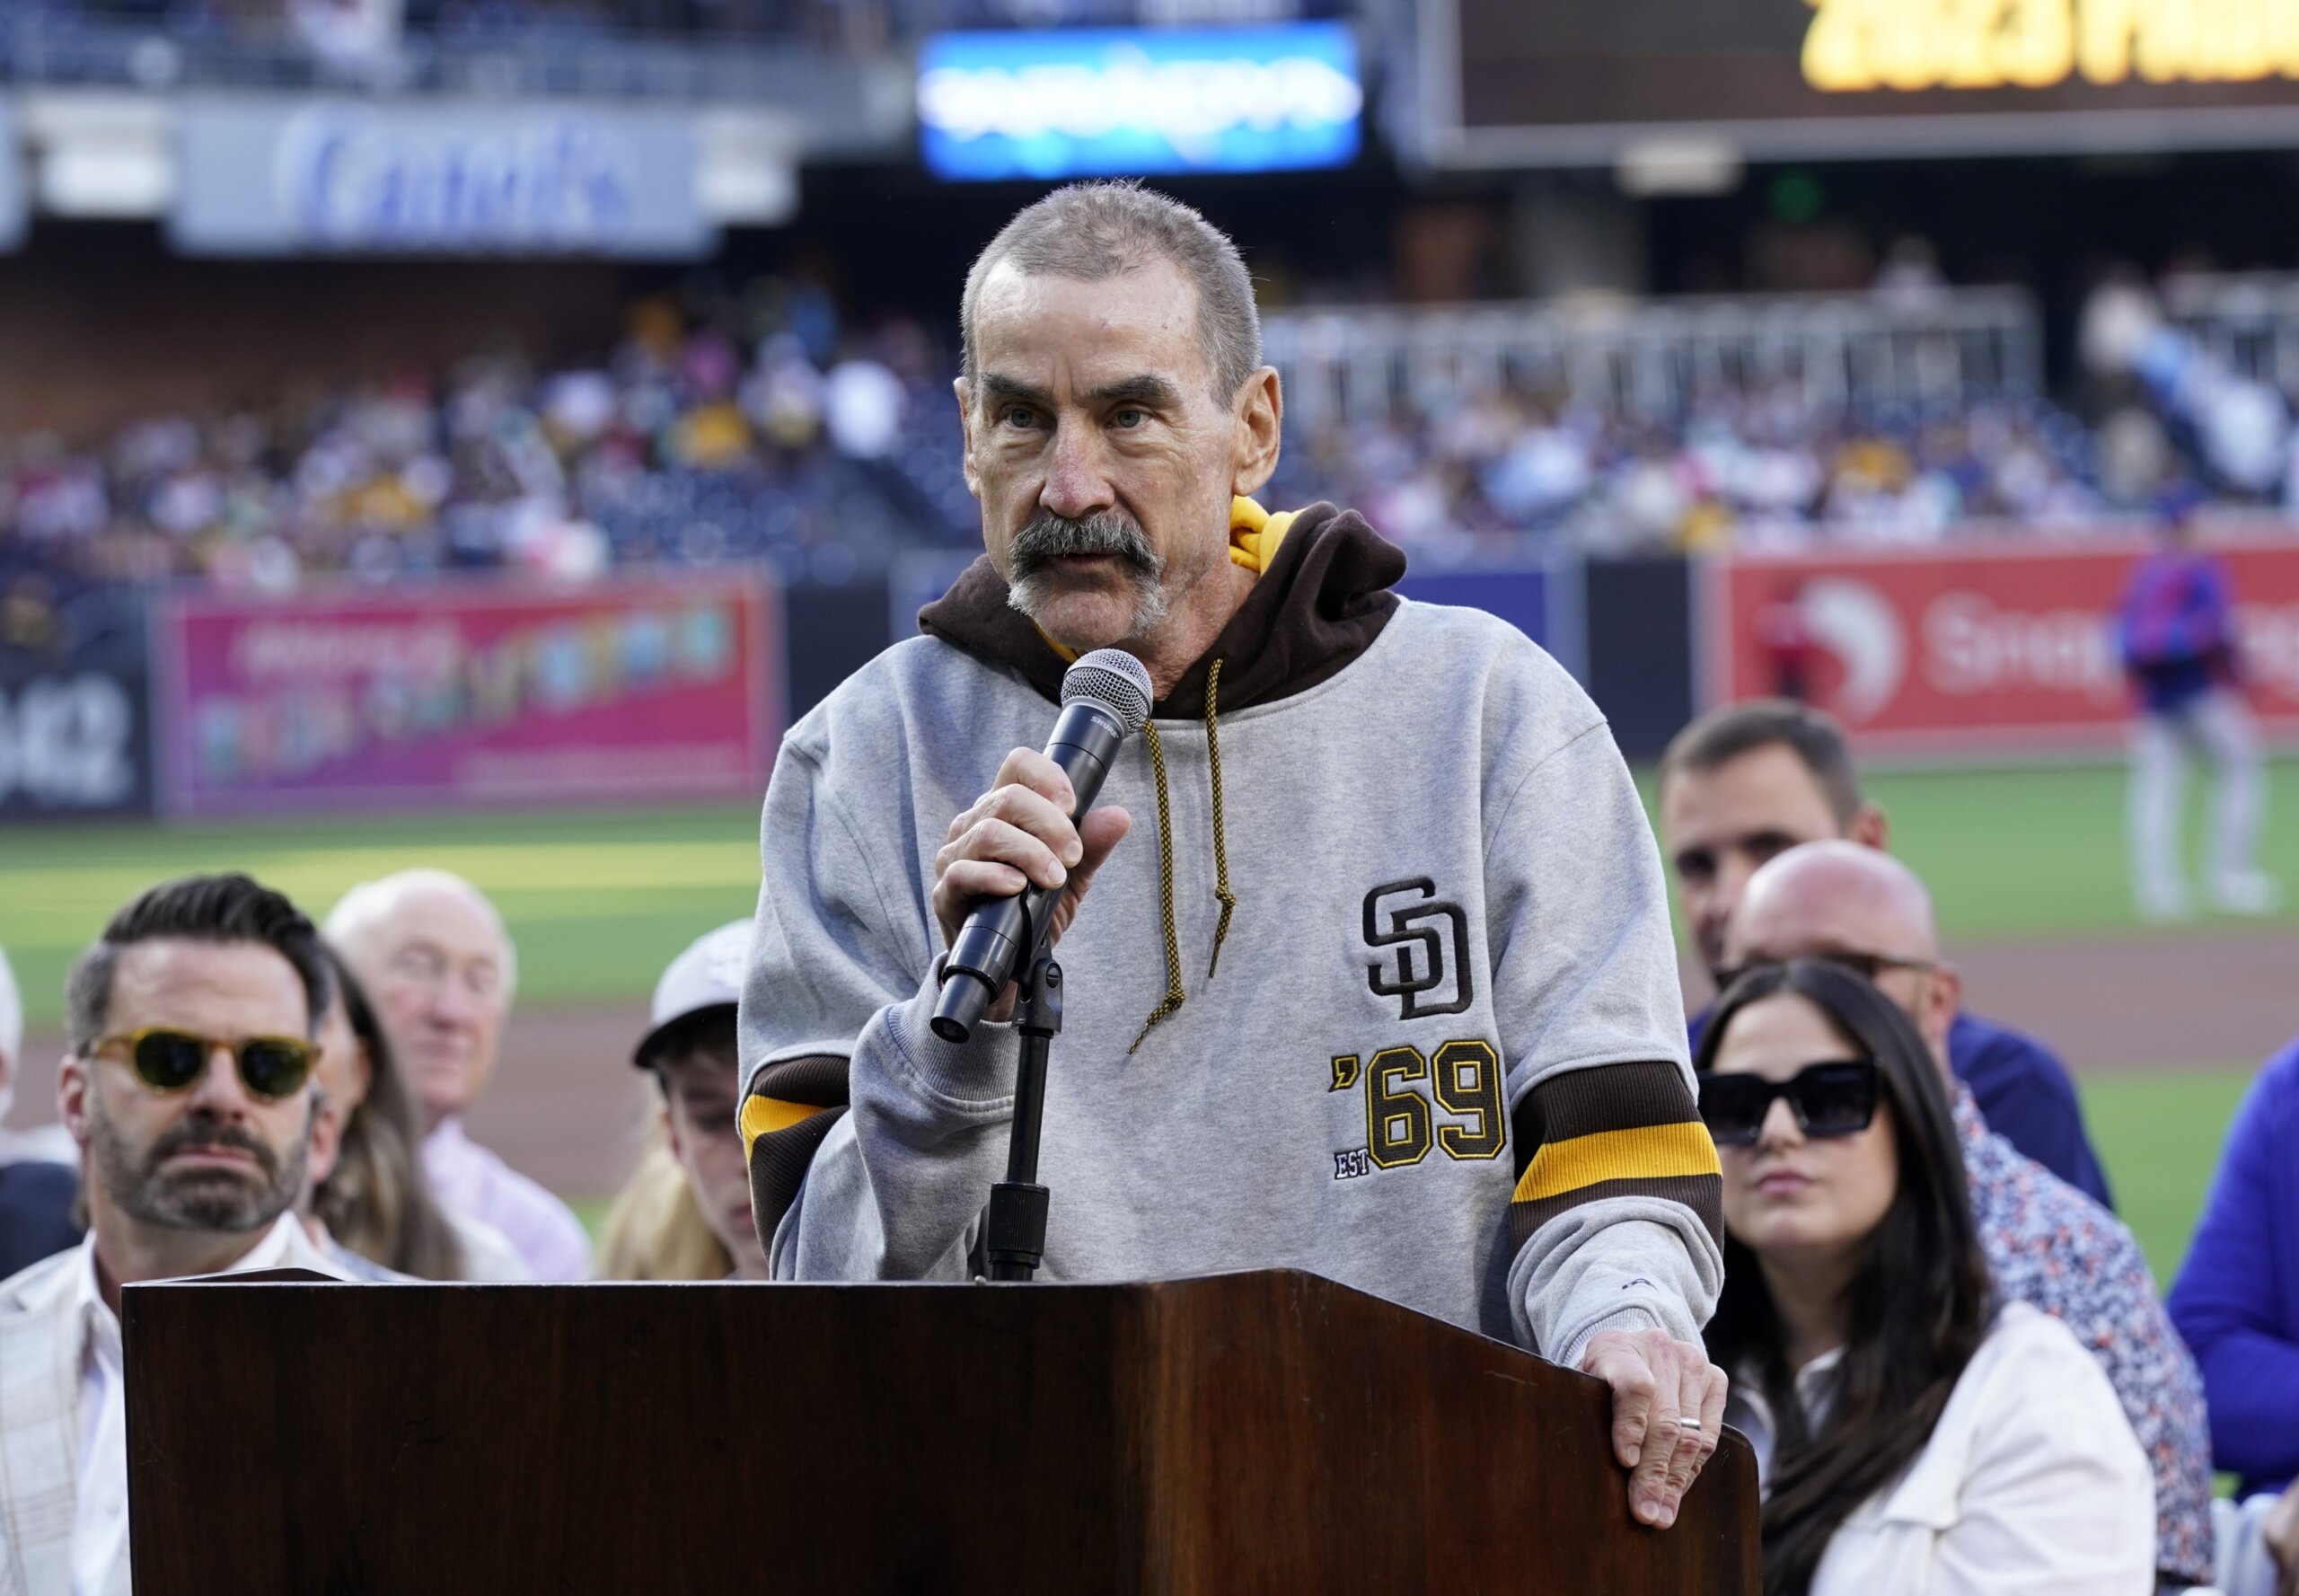 Padres new uni's: Are changes for ownership or fans?